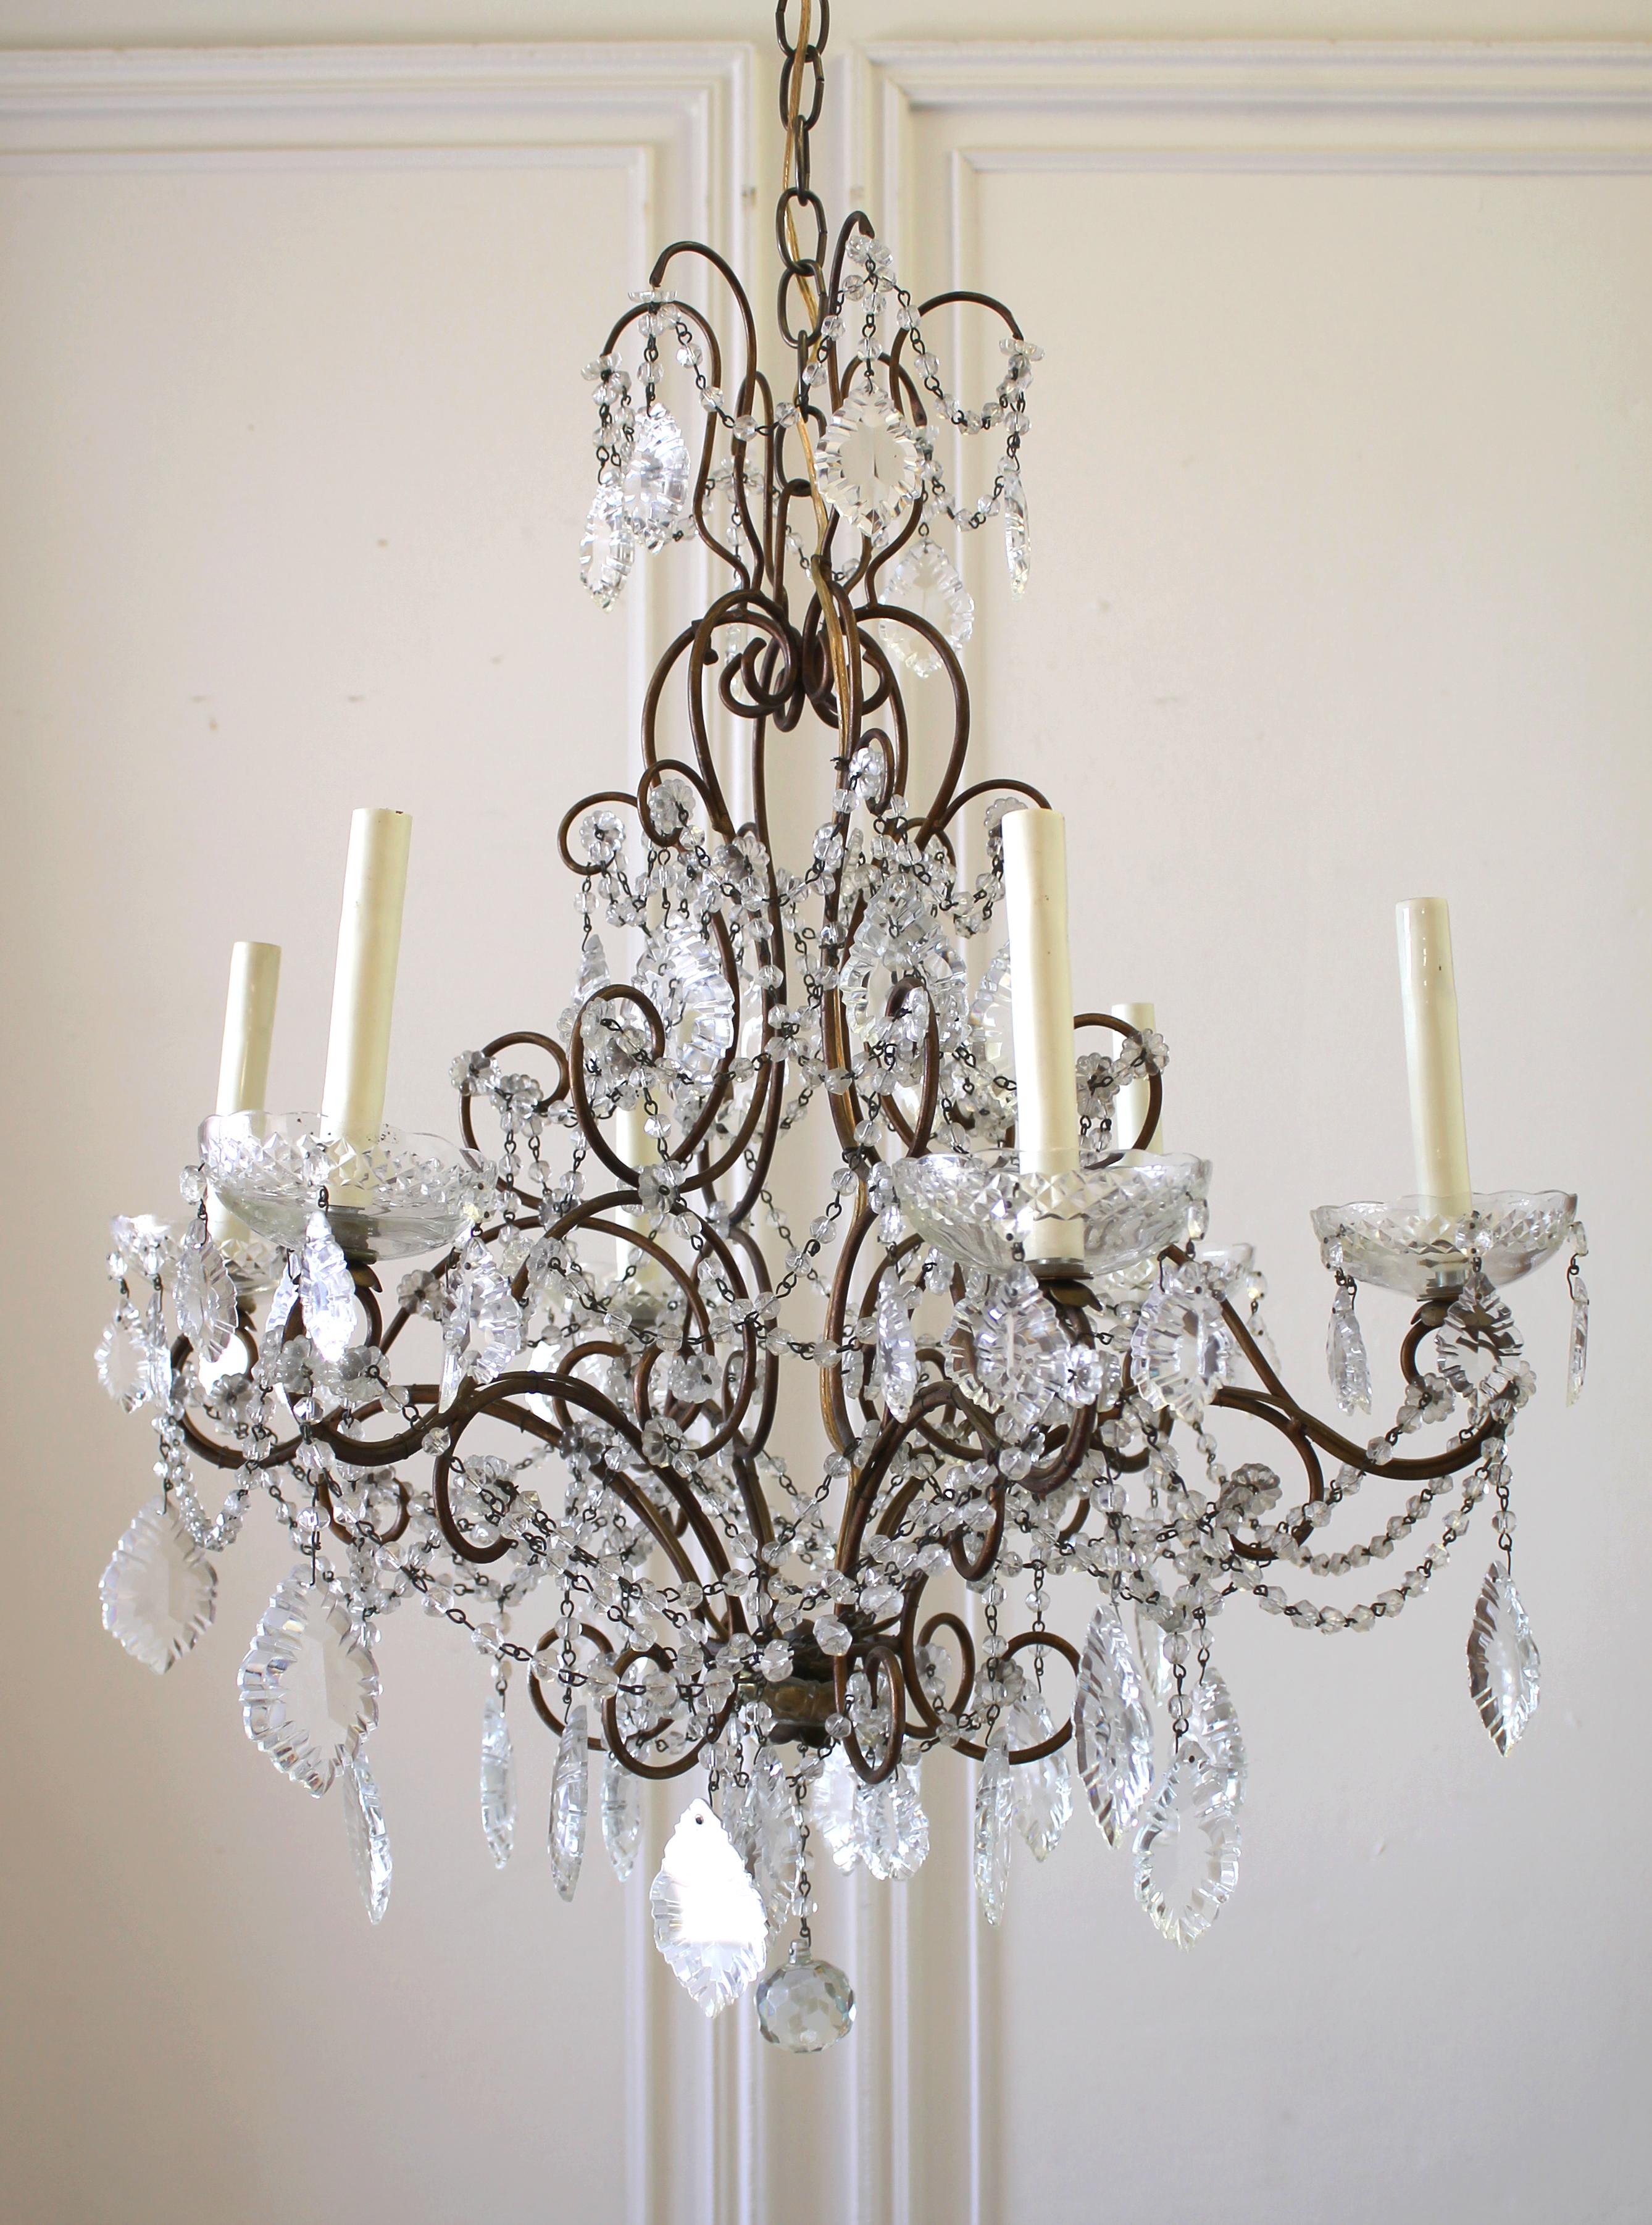 Vintage Italian Chandelier with round cut glass beads, and French crystal pendants. Large glass bobeches, with one of them being repaired (see photos). Bulbs have been placed in each socket and are working.
Measures: 25